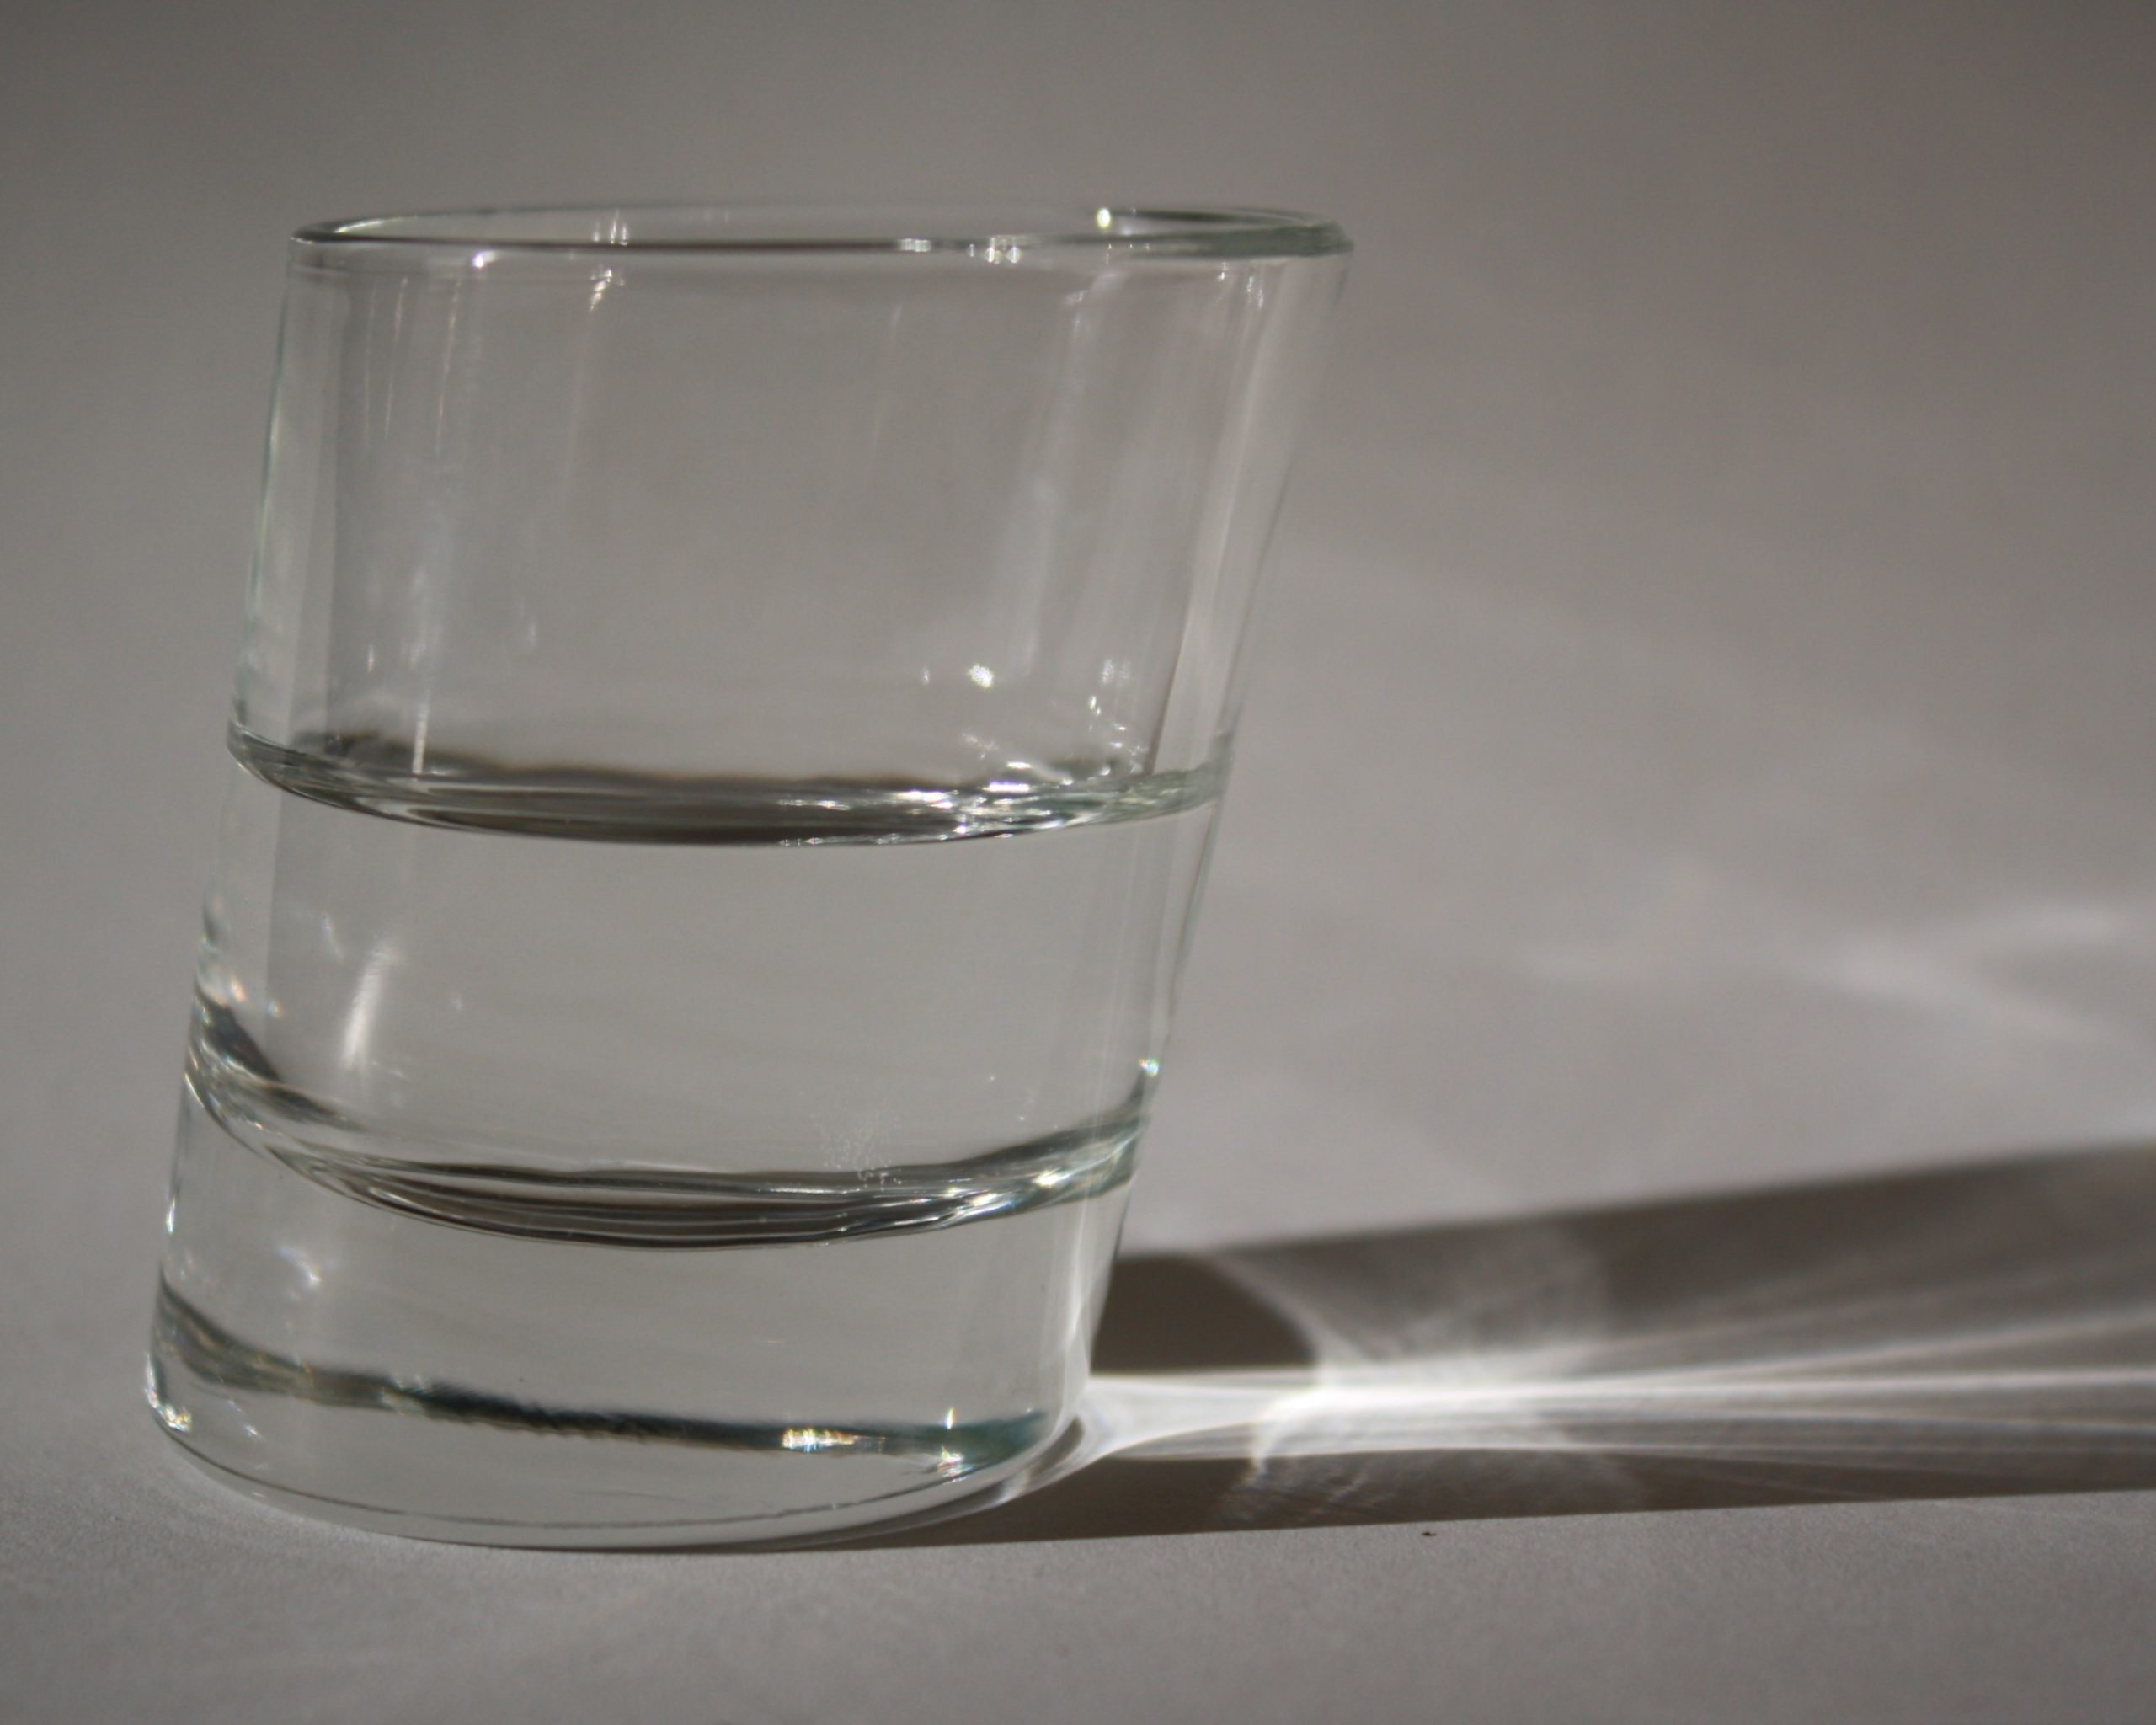 perspective: a tilted glass filled with water